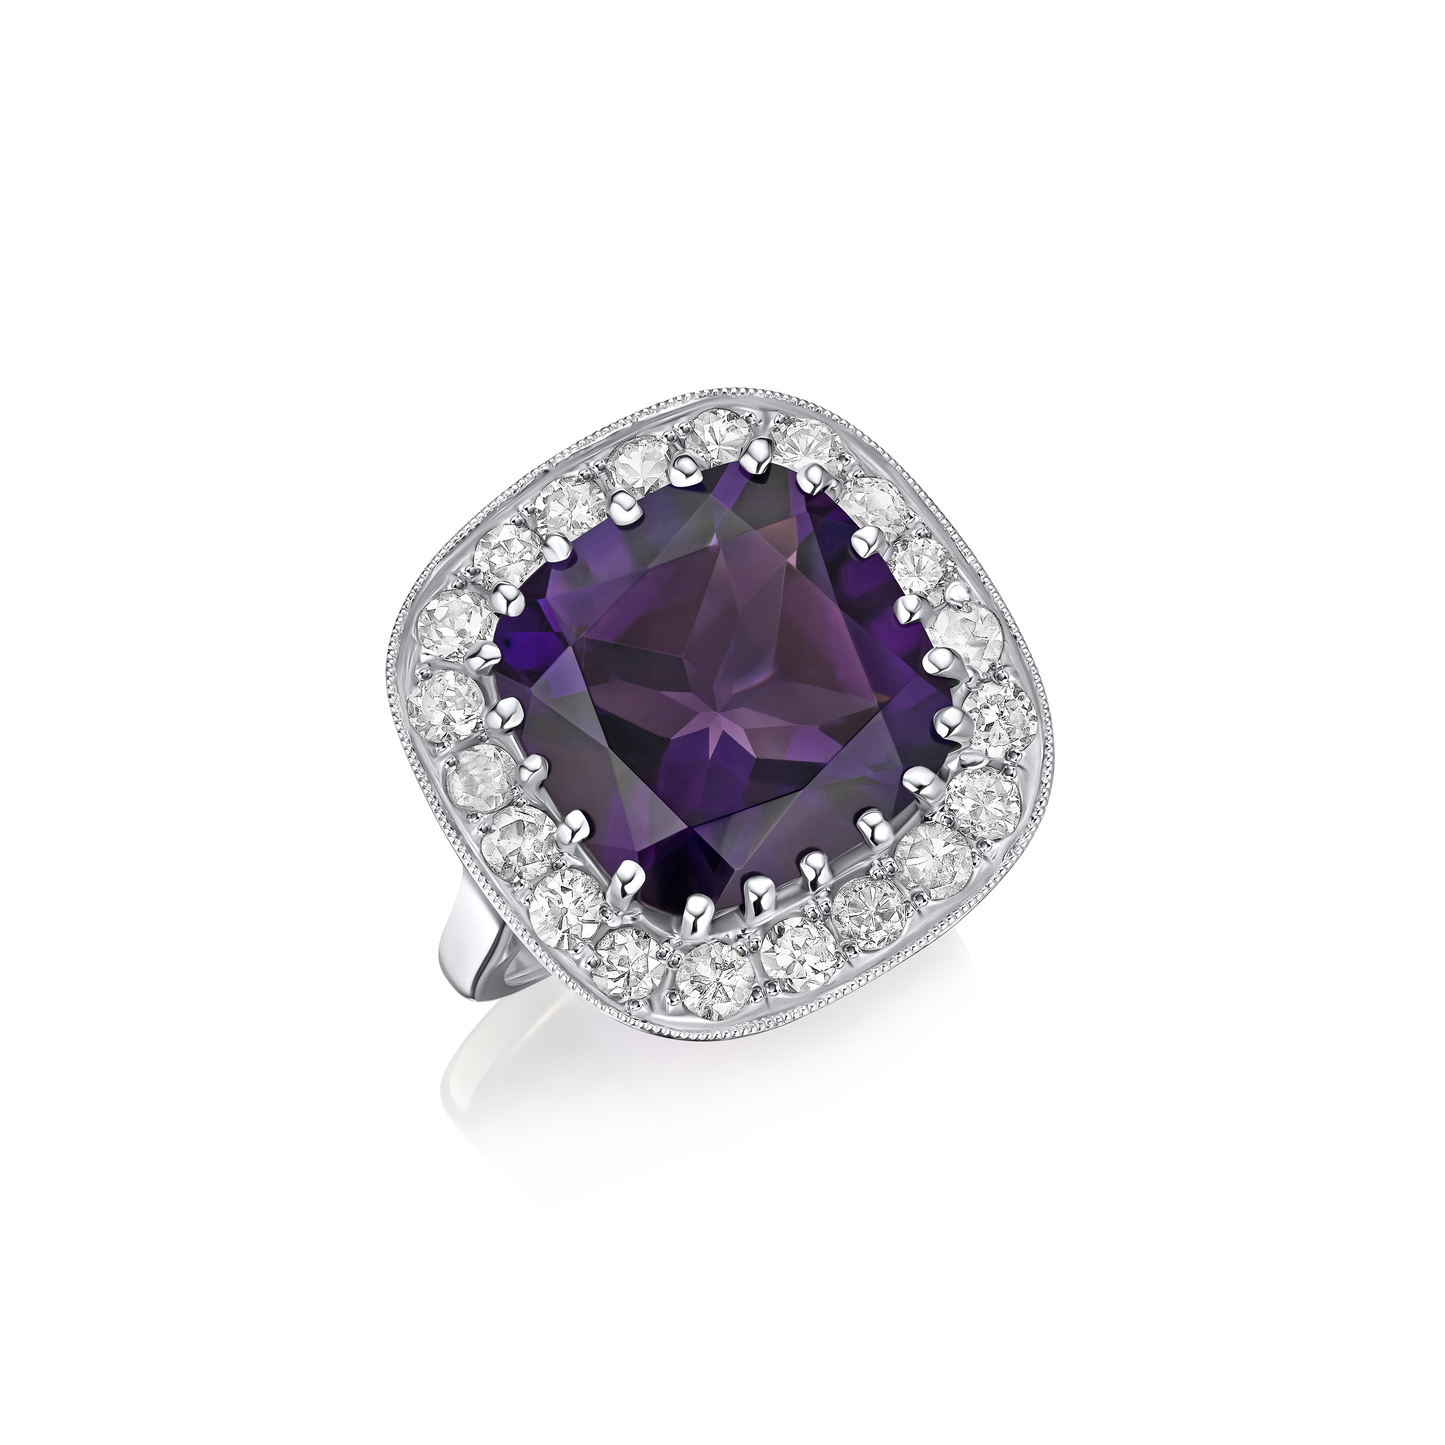 5.94cts Amethyst and Diamond Cluster Ring